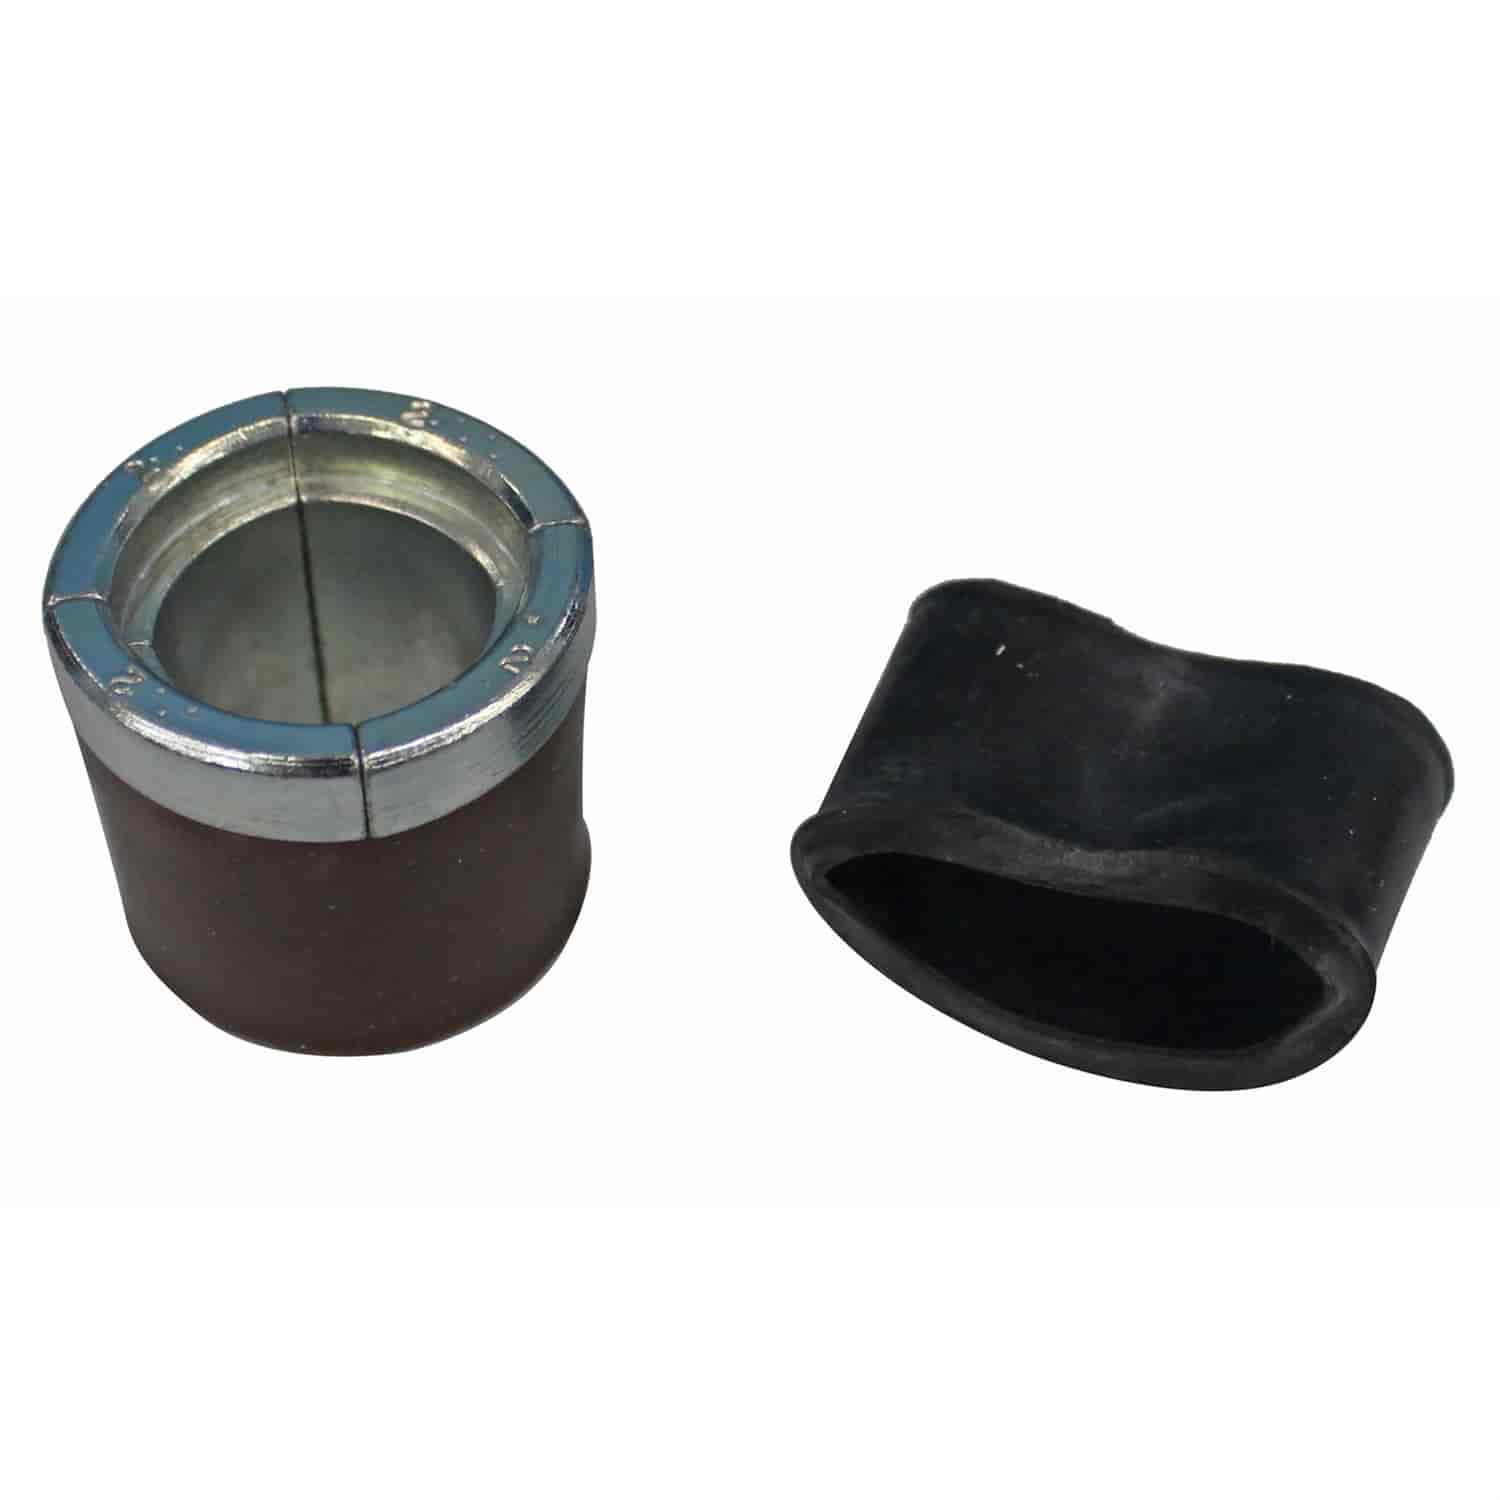 Expander Collet Bearing ID: 2.150" - 2.375"